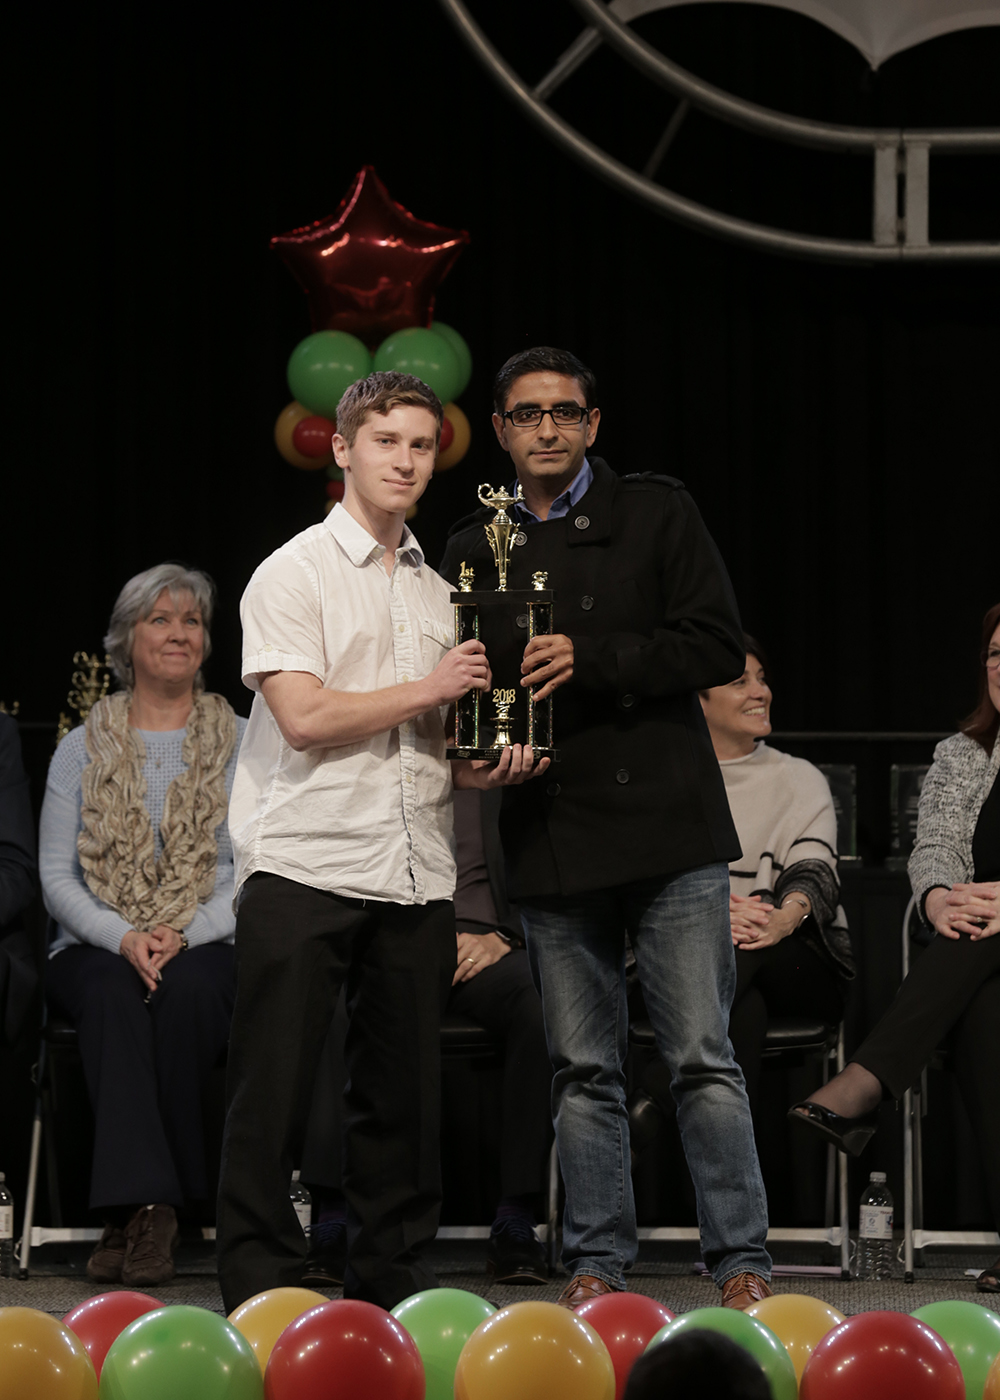 Bryce Yeazell receives his first place trophy at the Regional Science Fair. Photo by Austin Regional Science Festival.